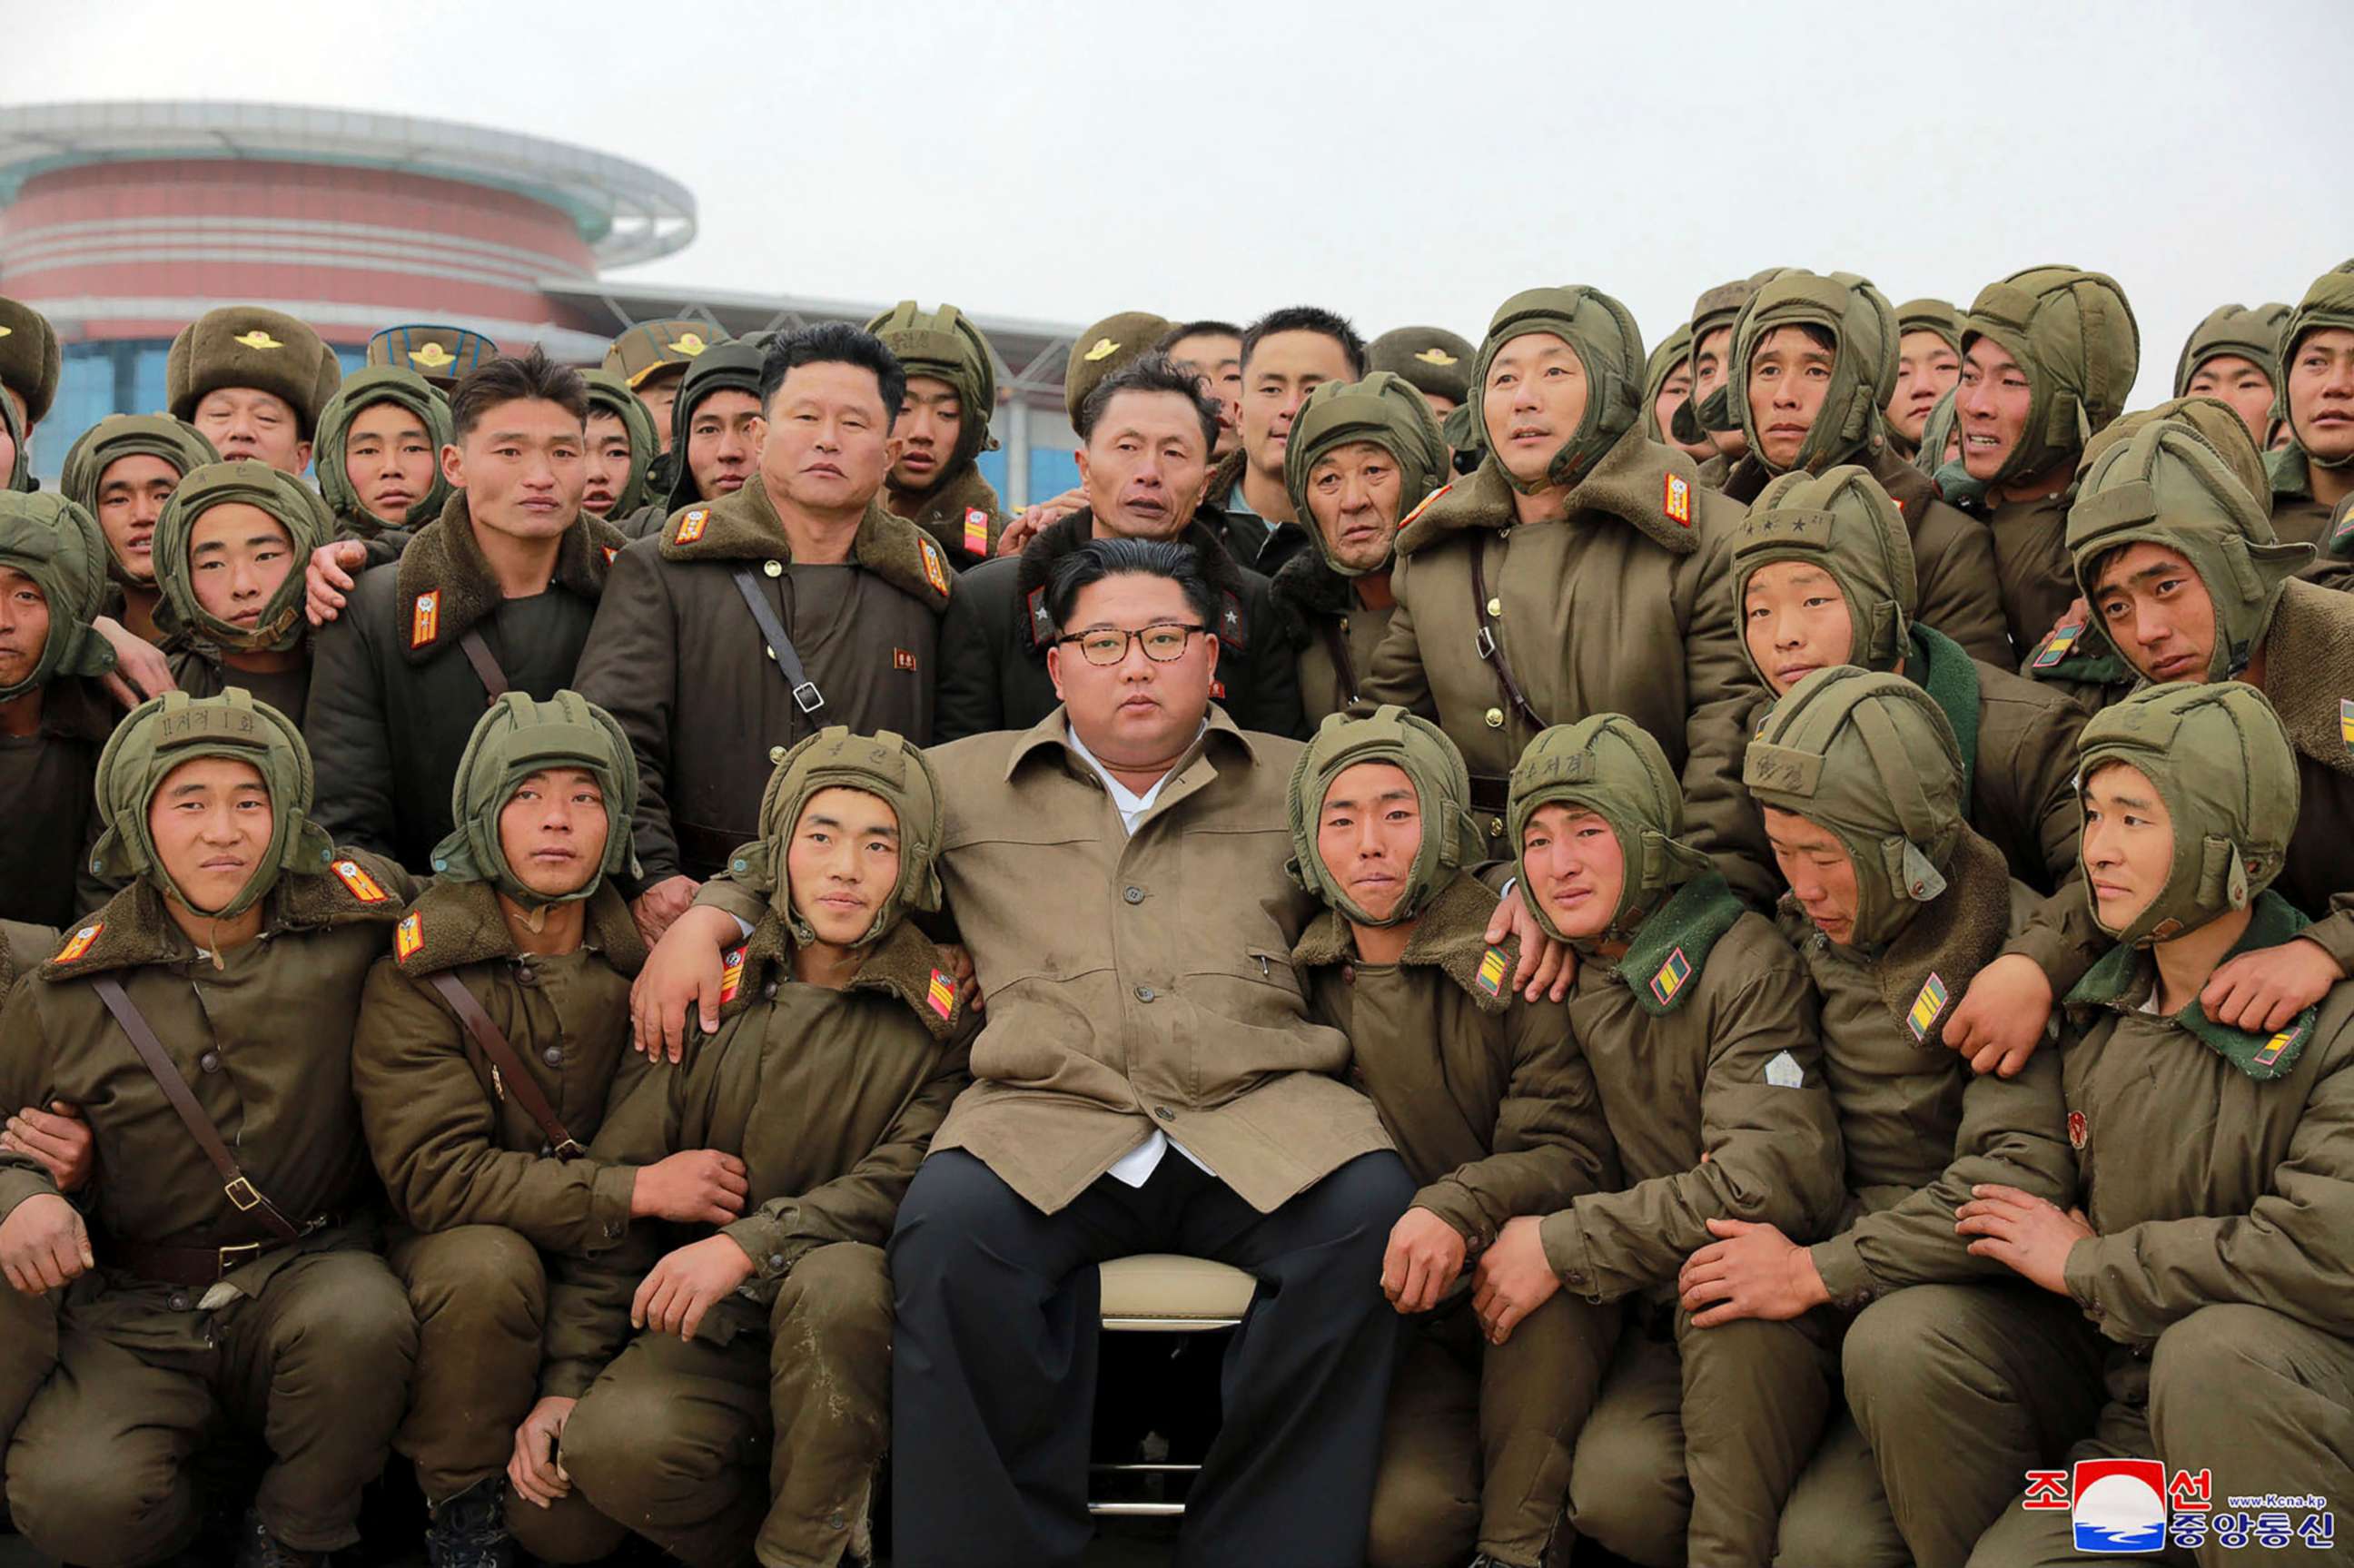 PHOTO: In this undated photo provided on Monday, Nov. 18, 2019, by the North Korean government, Kim Jong Un, center, poses with North Korean air force sharpshooters and soldiers for a photo at an unknown location in North Korea.